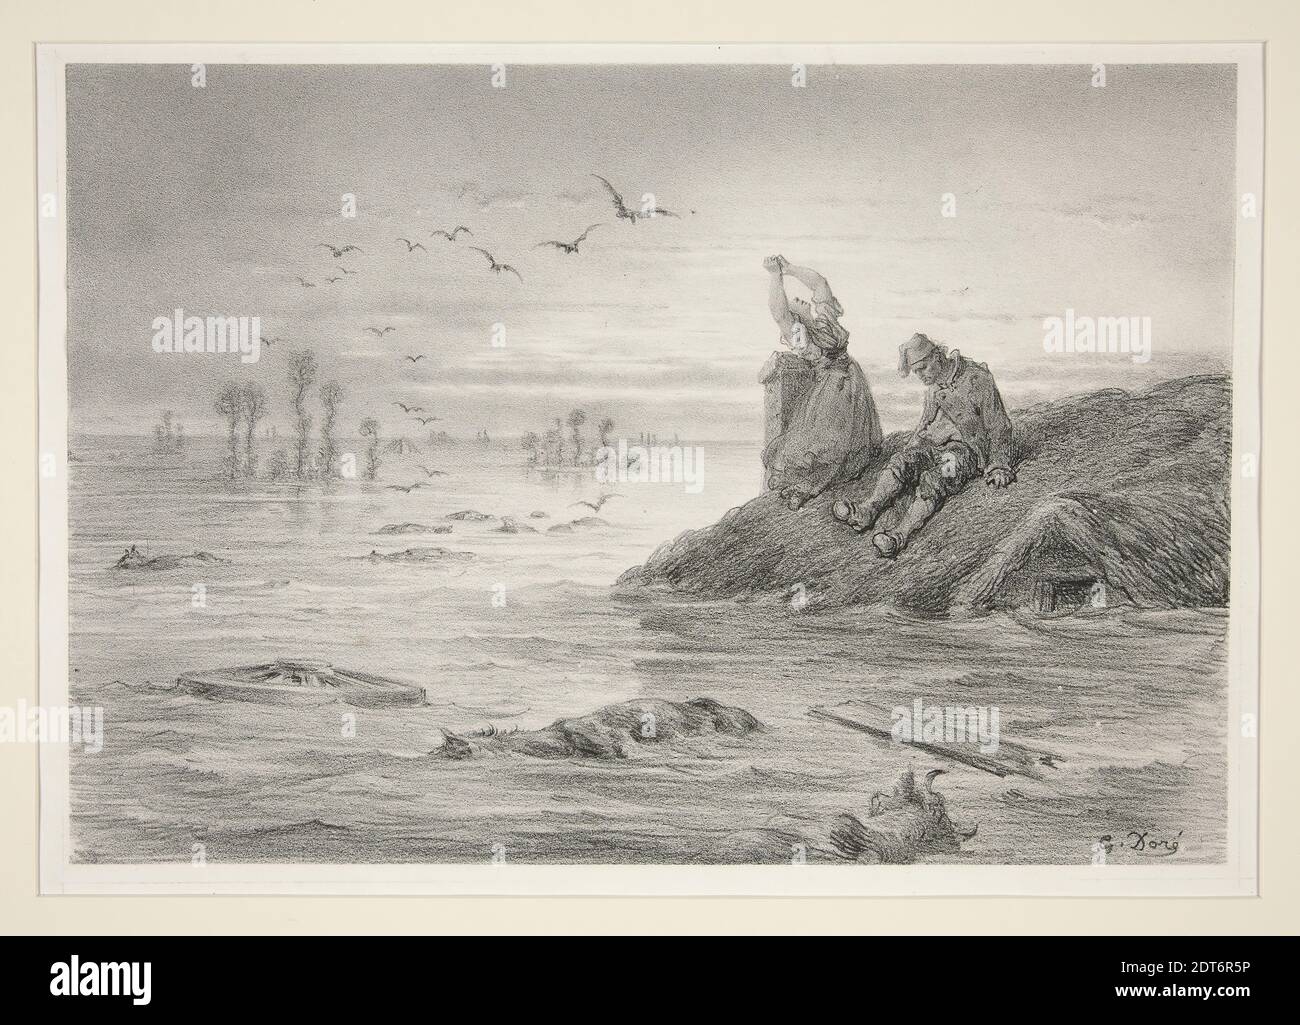 Artist: Gustave Doré, French, 1832–1883, Illustration (A Flood), 19th century, Lithograph, stone: 20.3 × 29.4 cm (8 × 11 9/16 in.), French, 19th century, Works on Paper - Prints Stock Photo